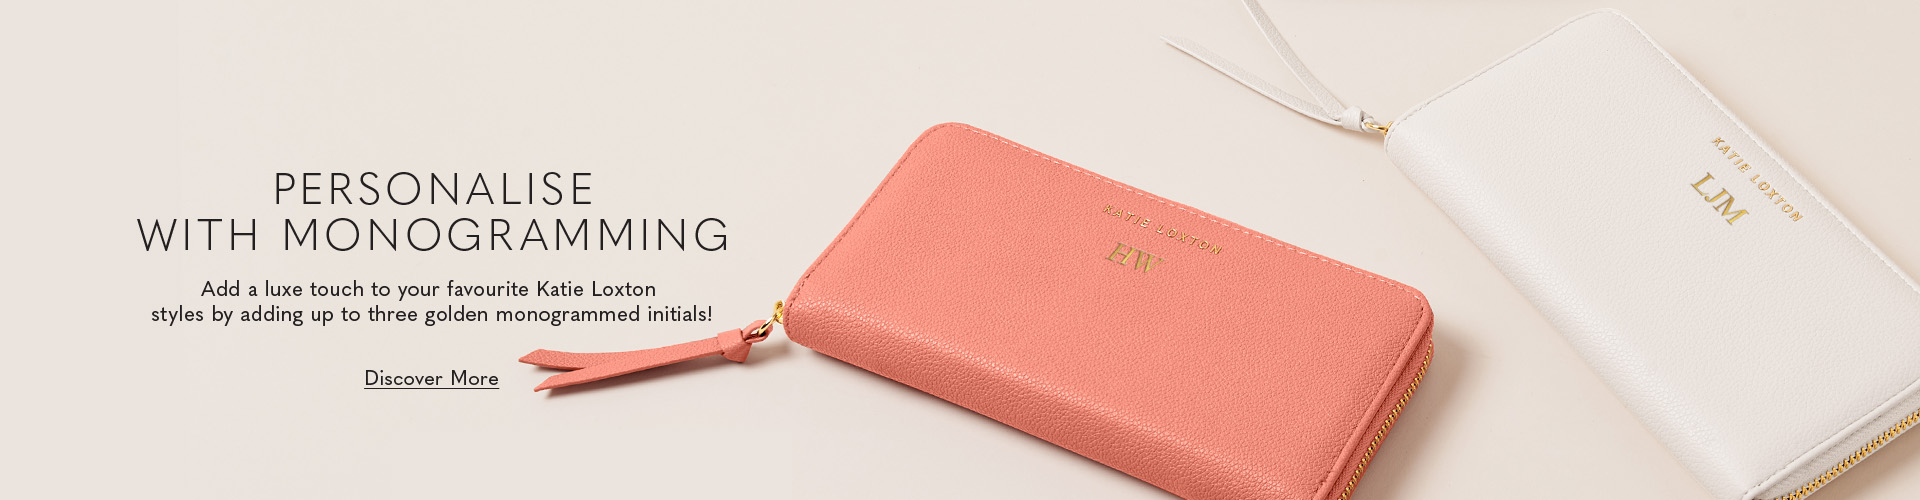 Monogramming Personalised Gifts for Her 